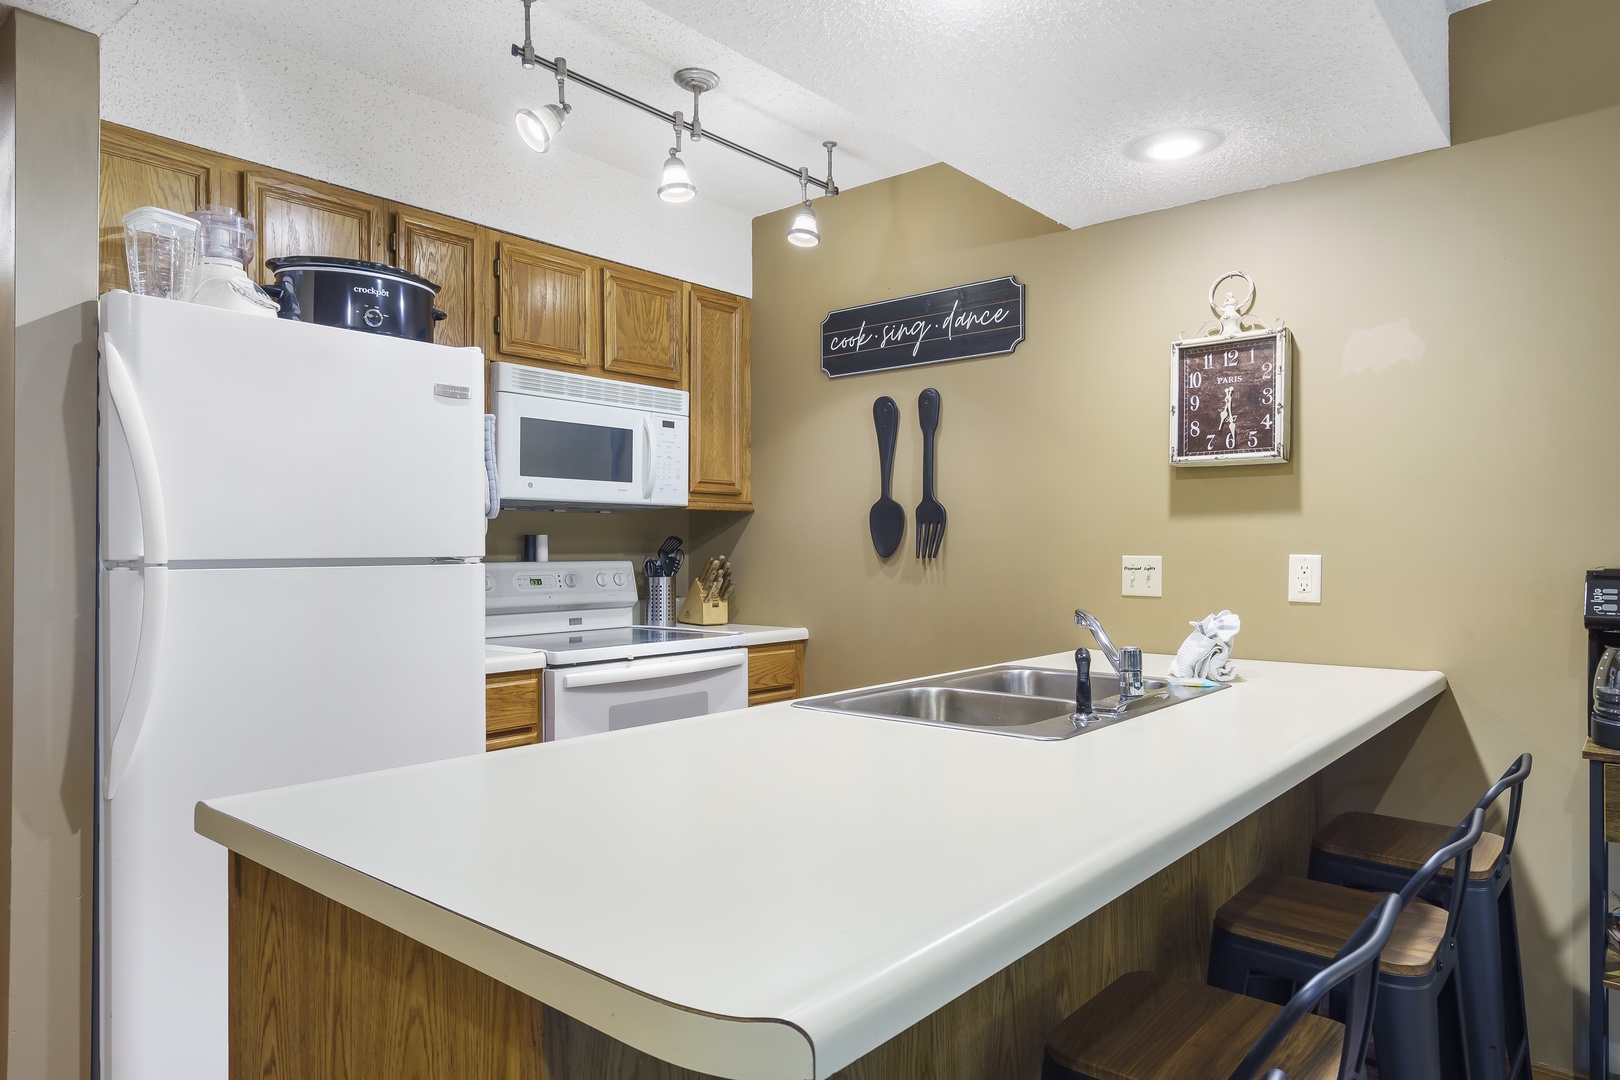 Additional county seating & full kitchen (unit 8)